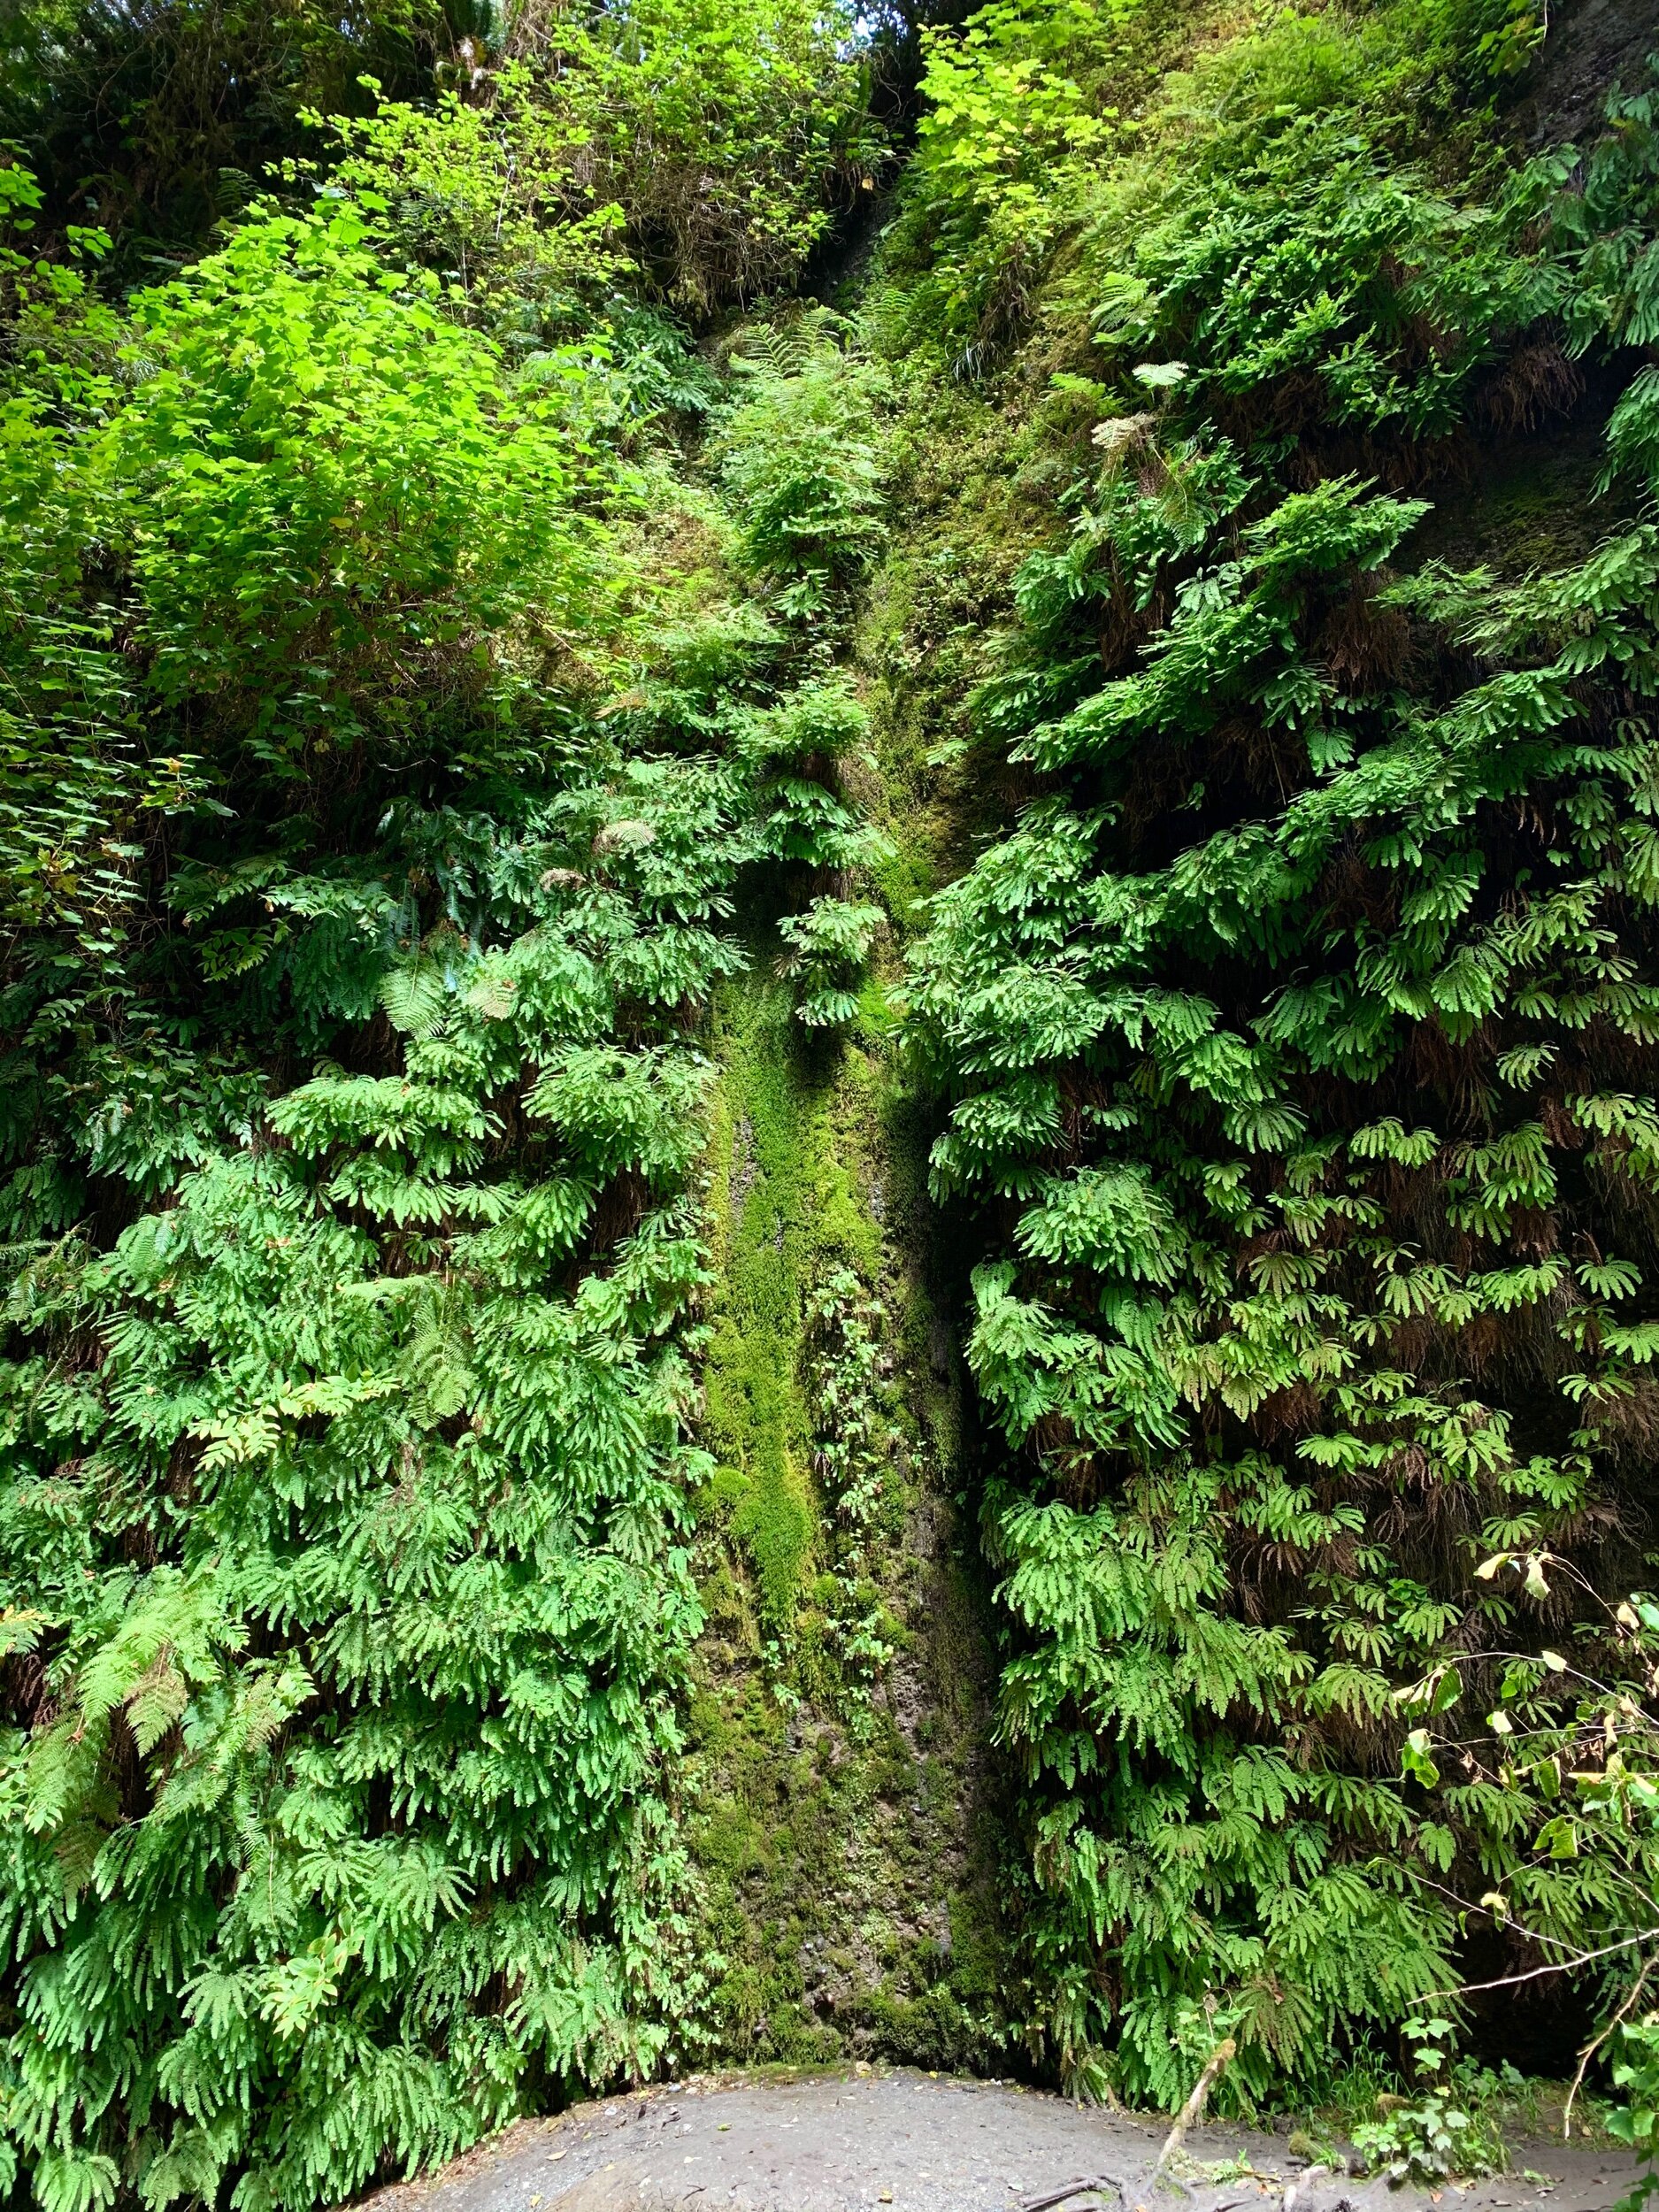   Prairie Creek Redwoods State Park  near Redwood National Park is known for the hiking trail through  Fern Canyon,  where various types of ferns grow over a 50-foot wall. This lush tropical paradise was a filming spot for   The Lost World: Jurassic 